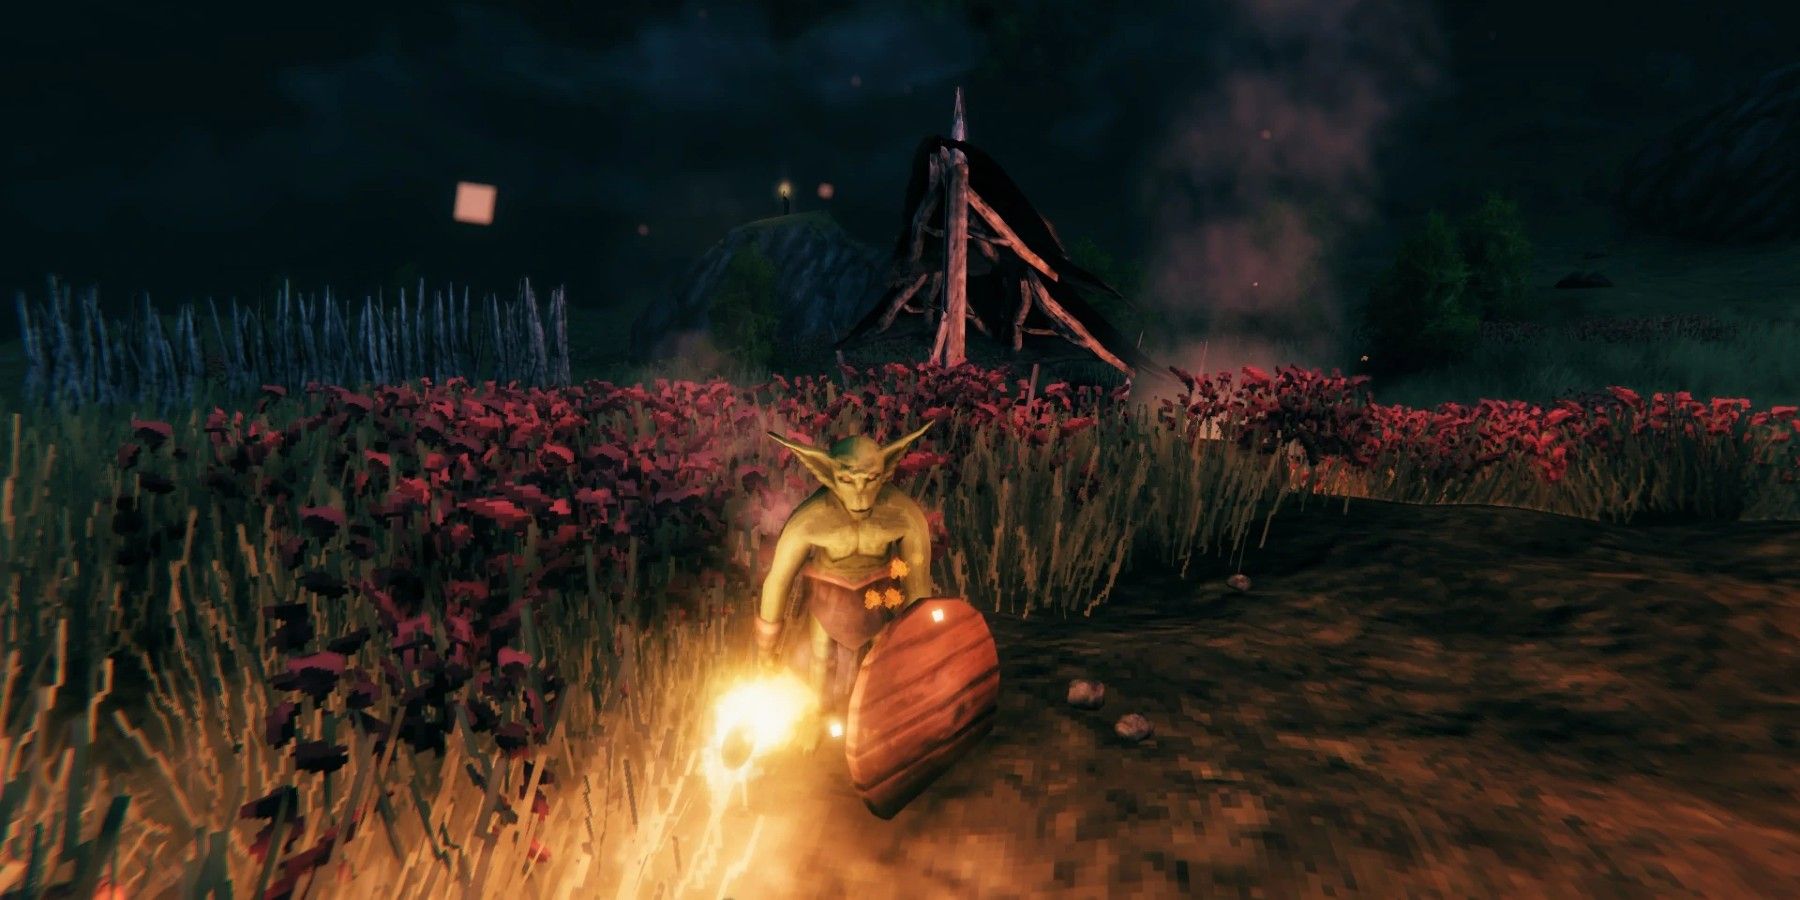 A Fuling is a goblin-like creature in Valheim's Plains biome